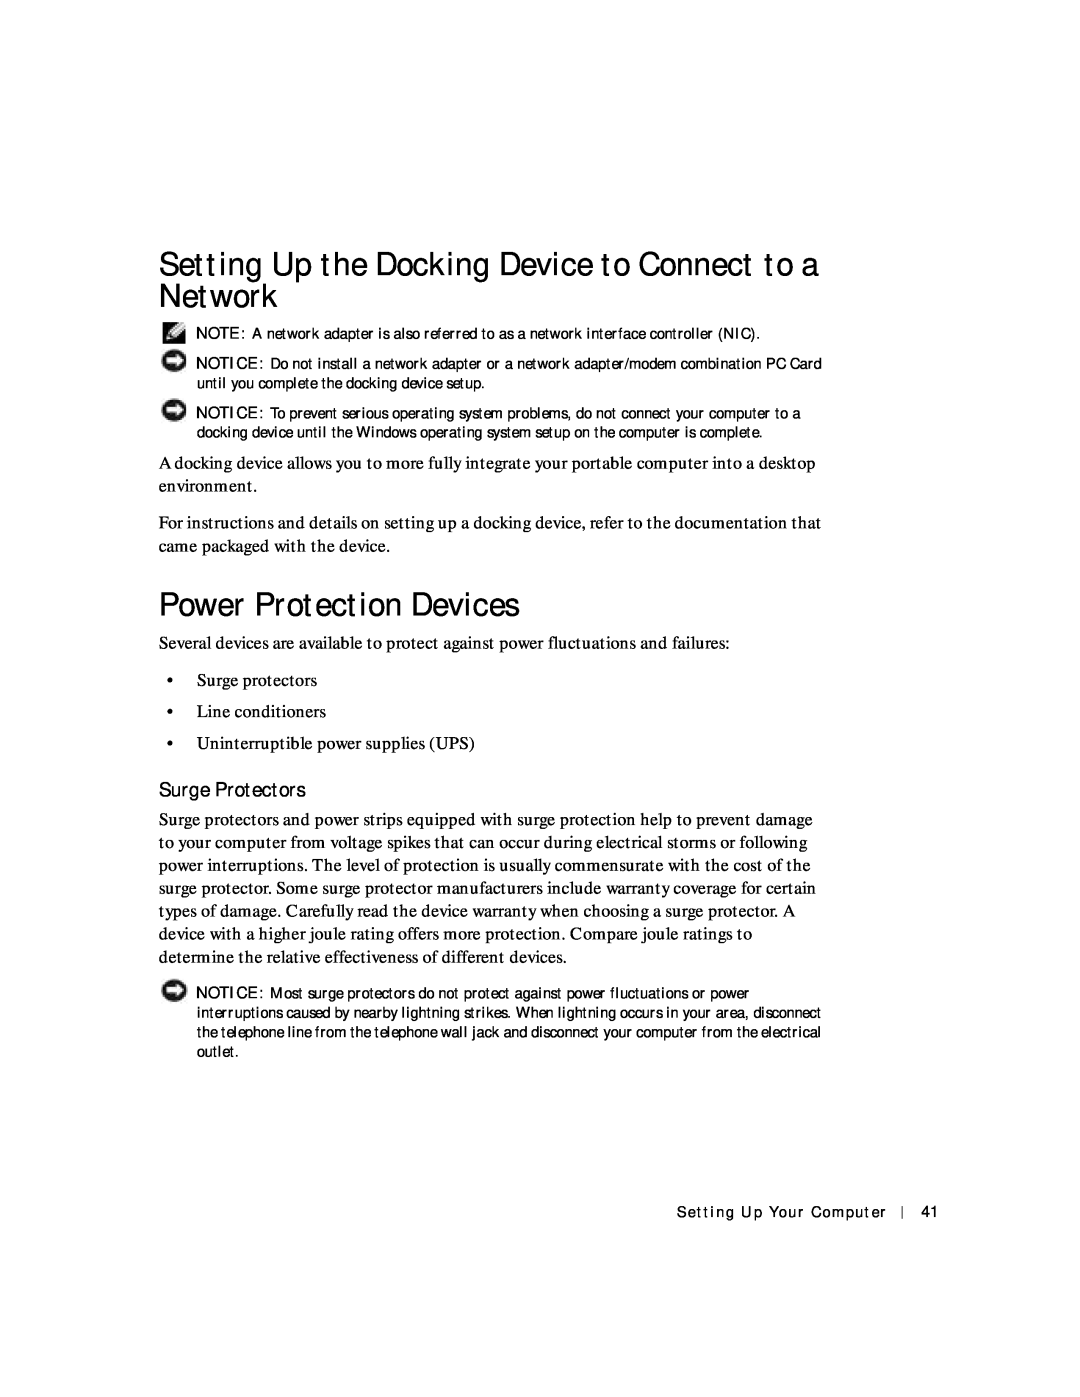 Dell 8600 manual Setting Up the Docking Device to Connect to a Network, Power Protection Devices, Surge Protectors 